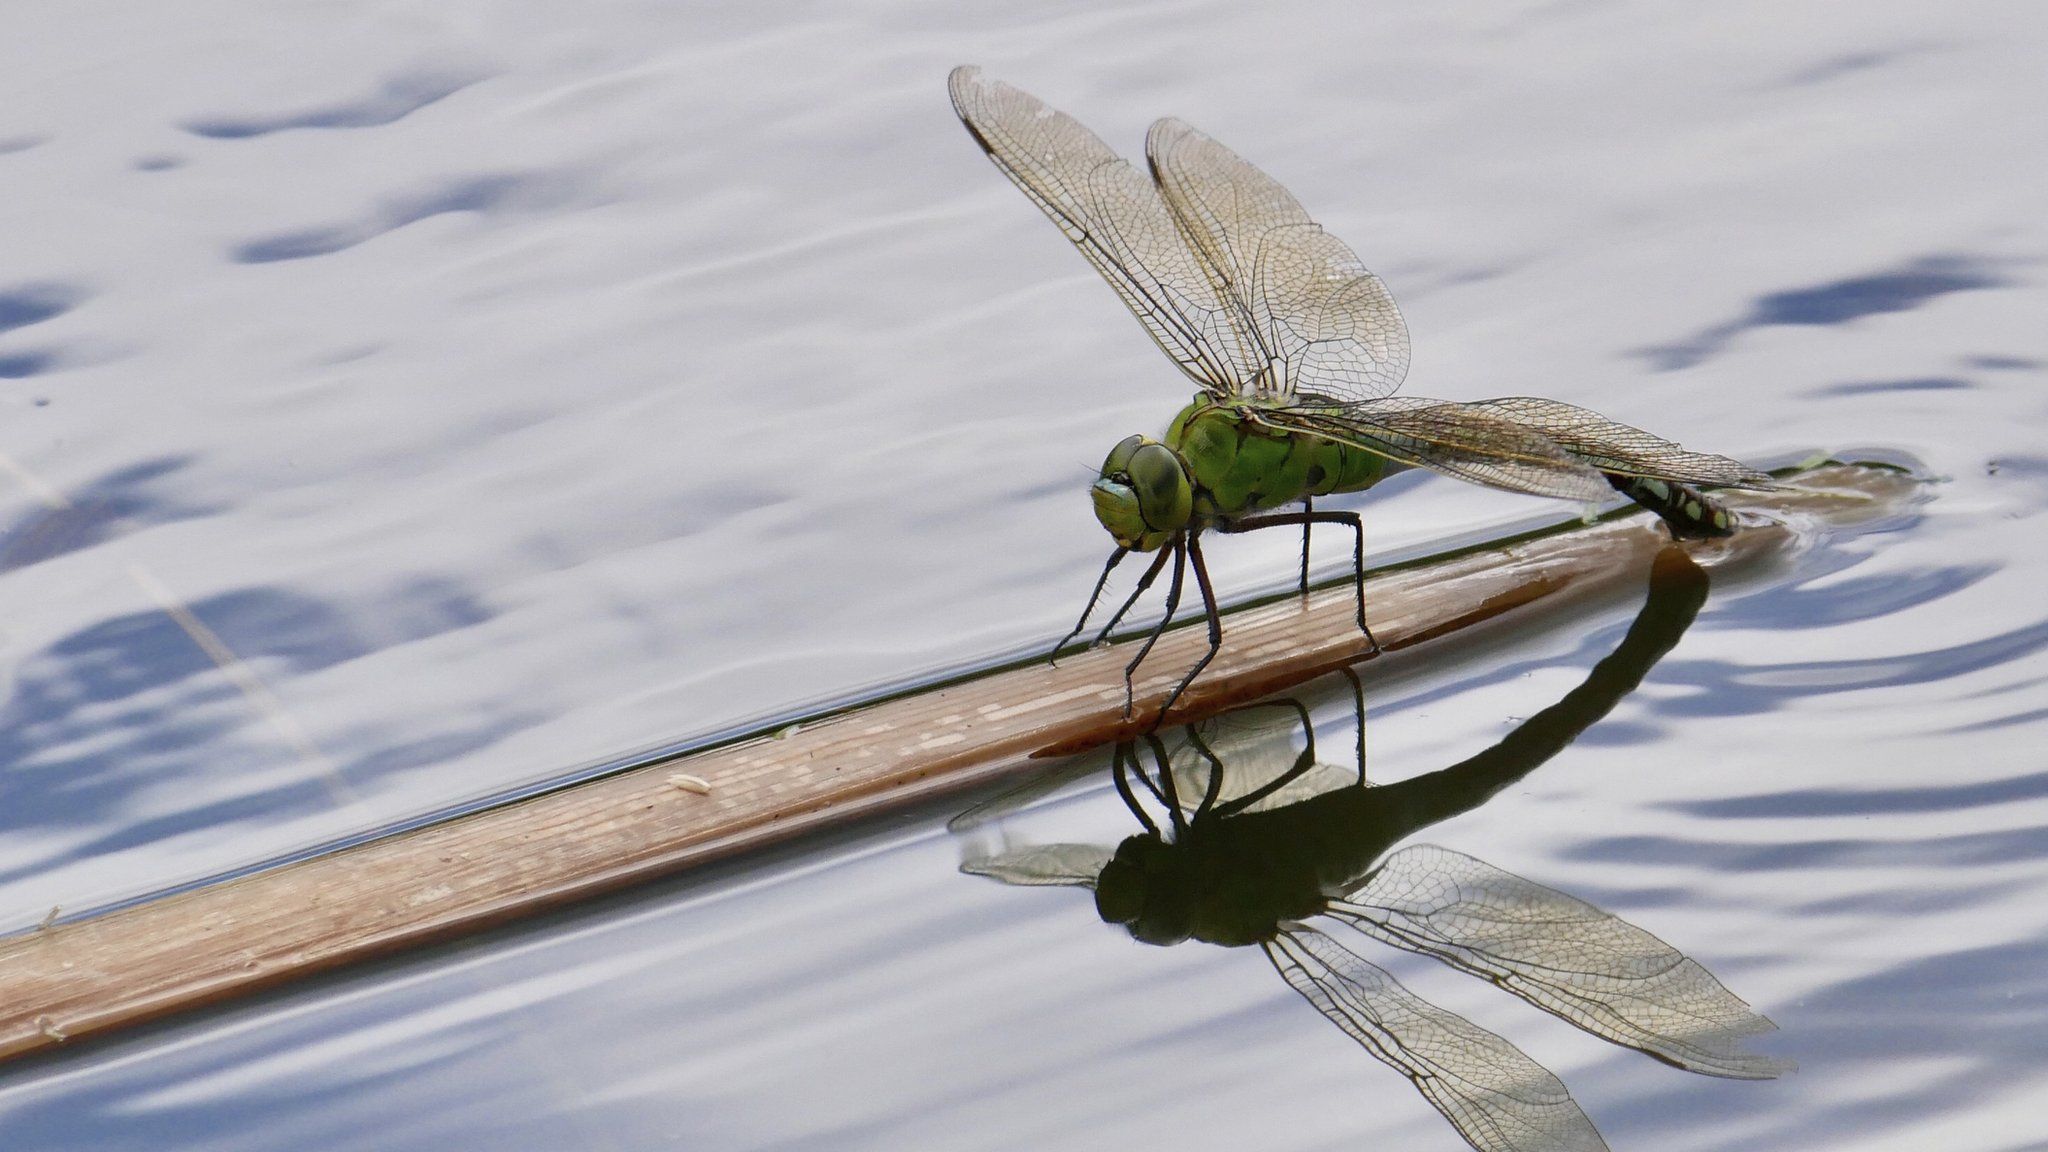 Emperor dragonfly Anax imperator